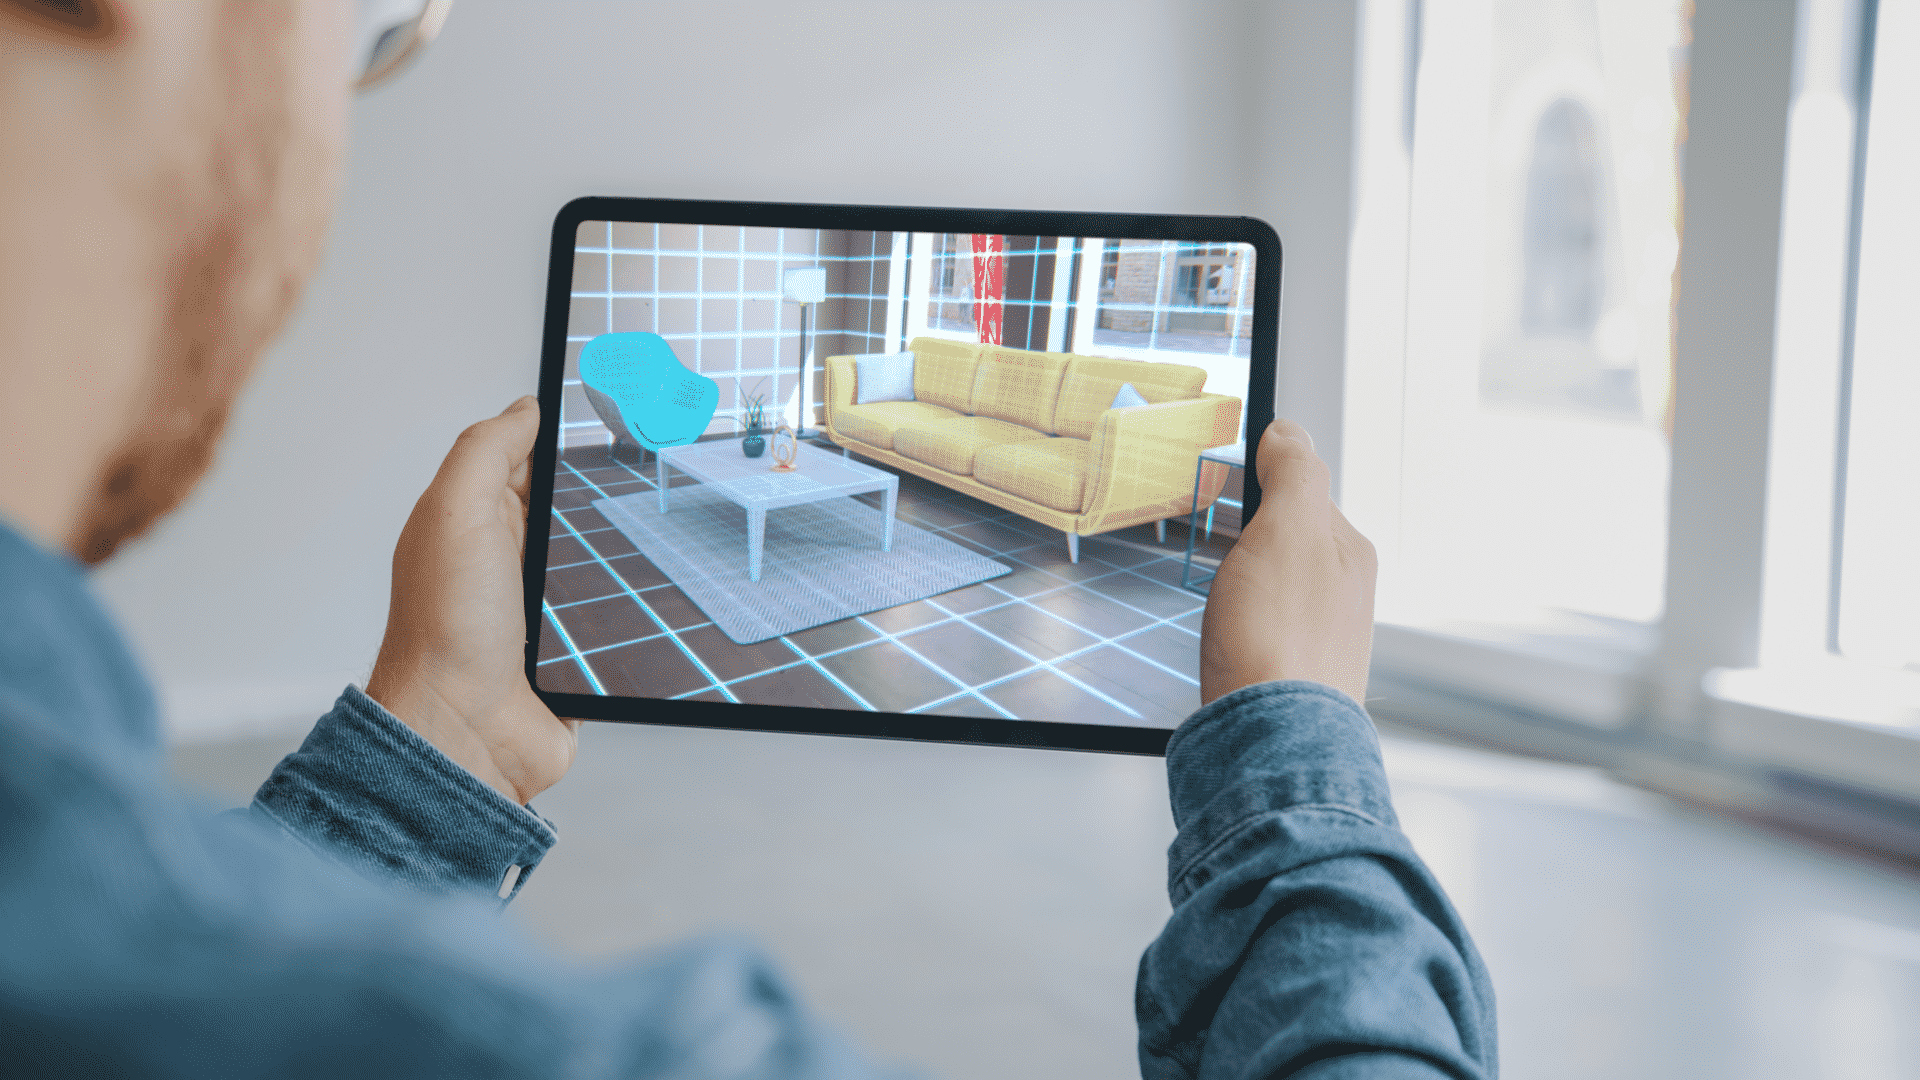 New AR advertising experience from Emodo's partnership with 8th Wall